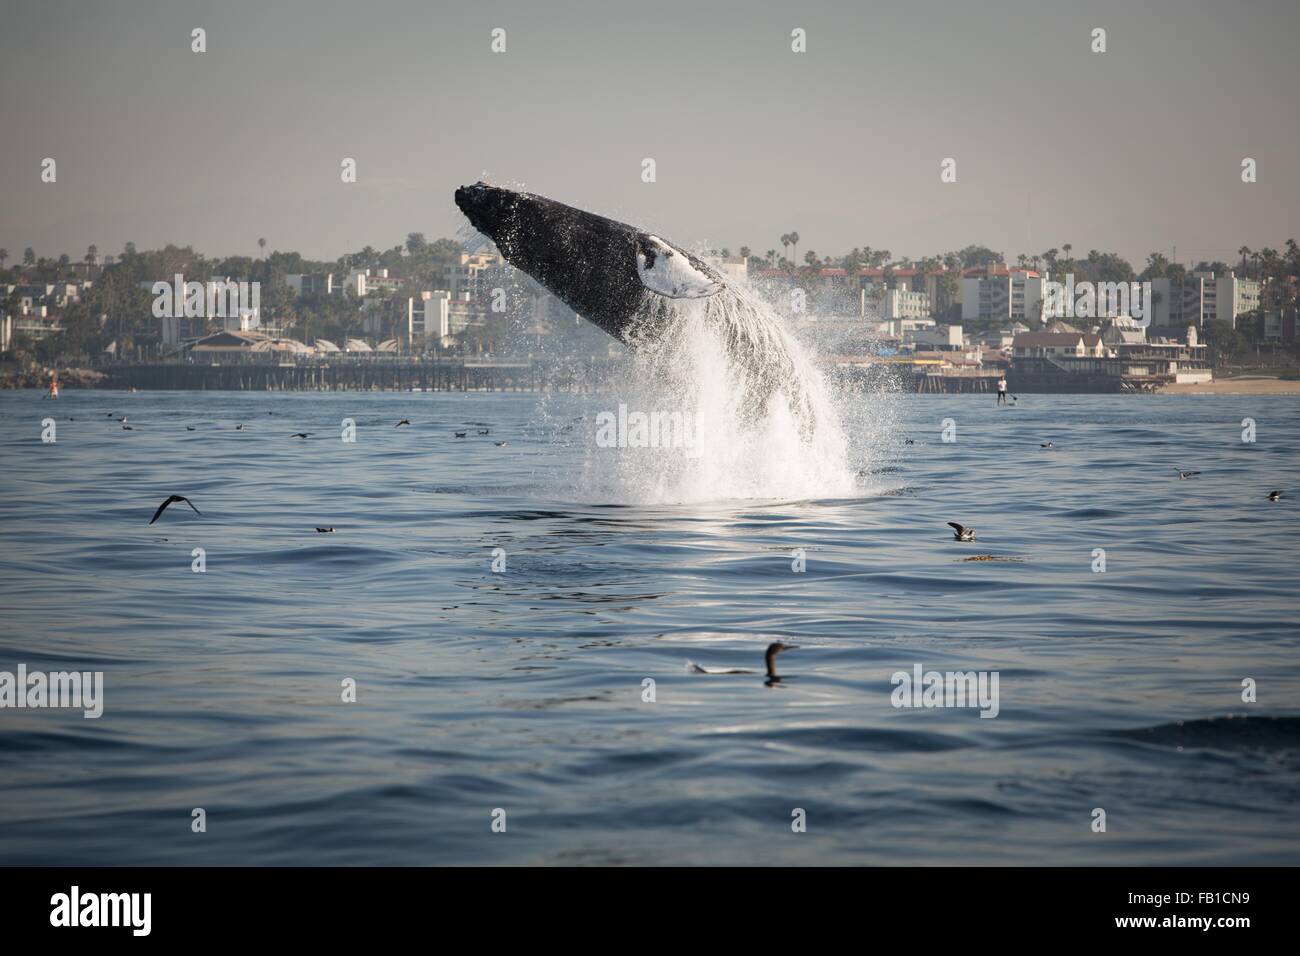 Side view of humpback whale breaching, West Coast, Pacific Ocean Stock Photo